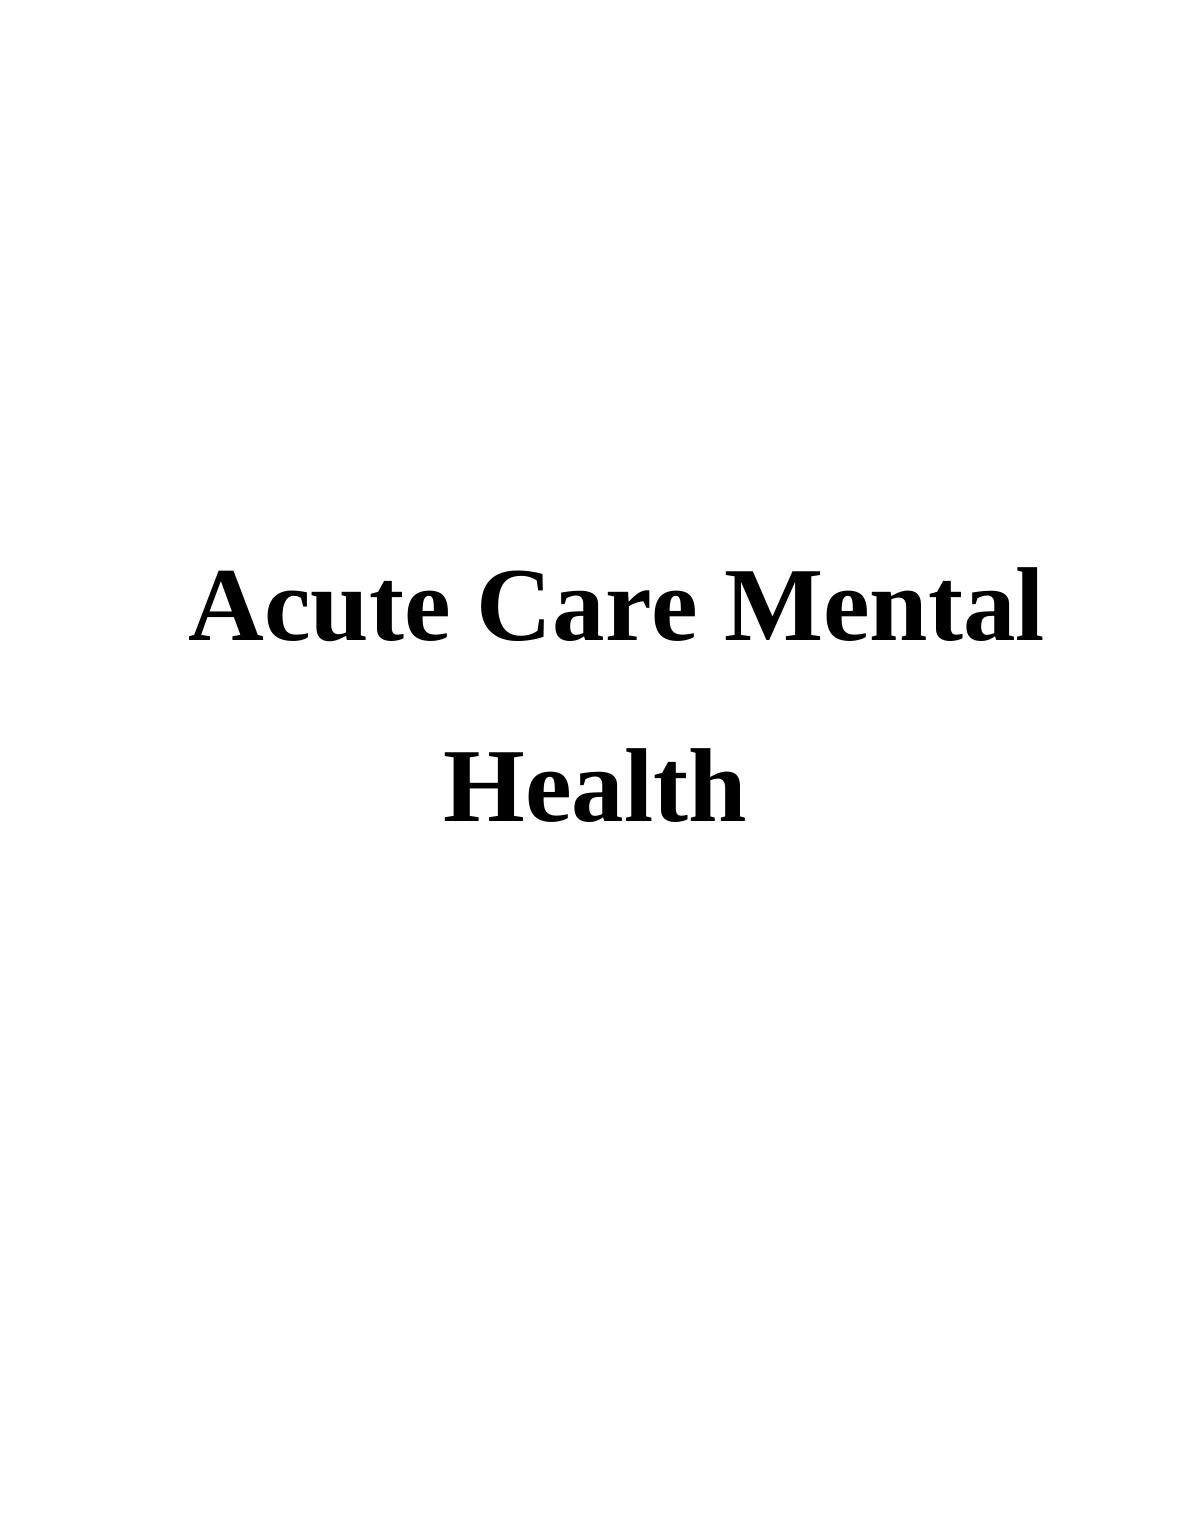 Acute Care Mental Health: Assessment and Care Plan for Bipolar Patients_1